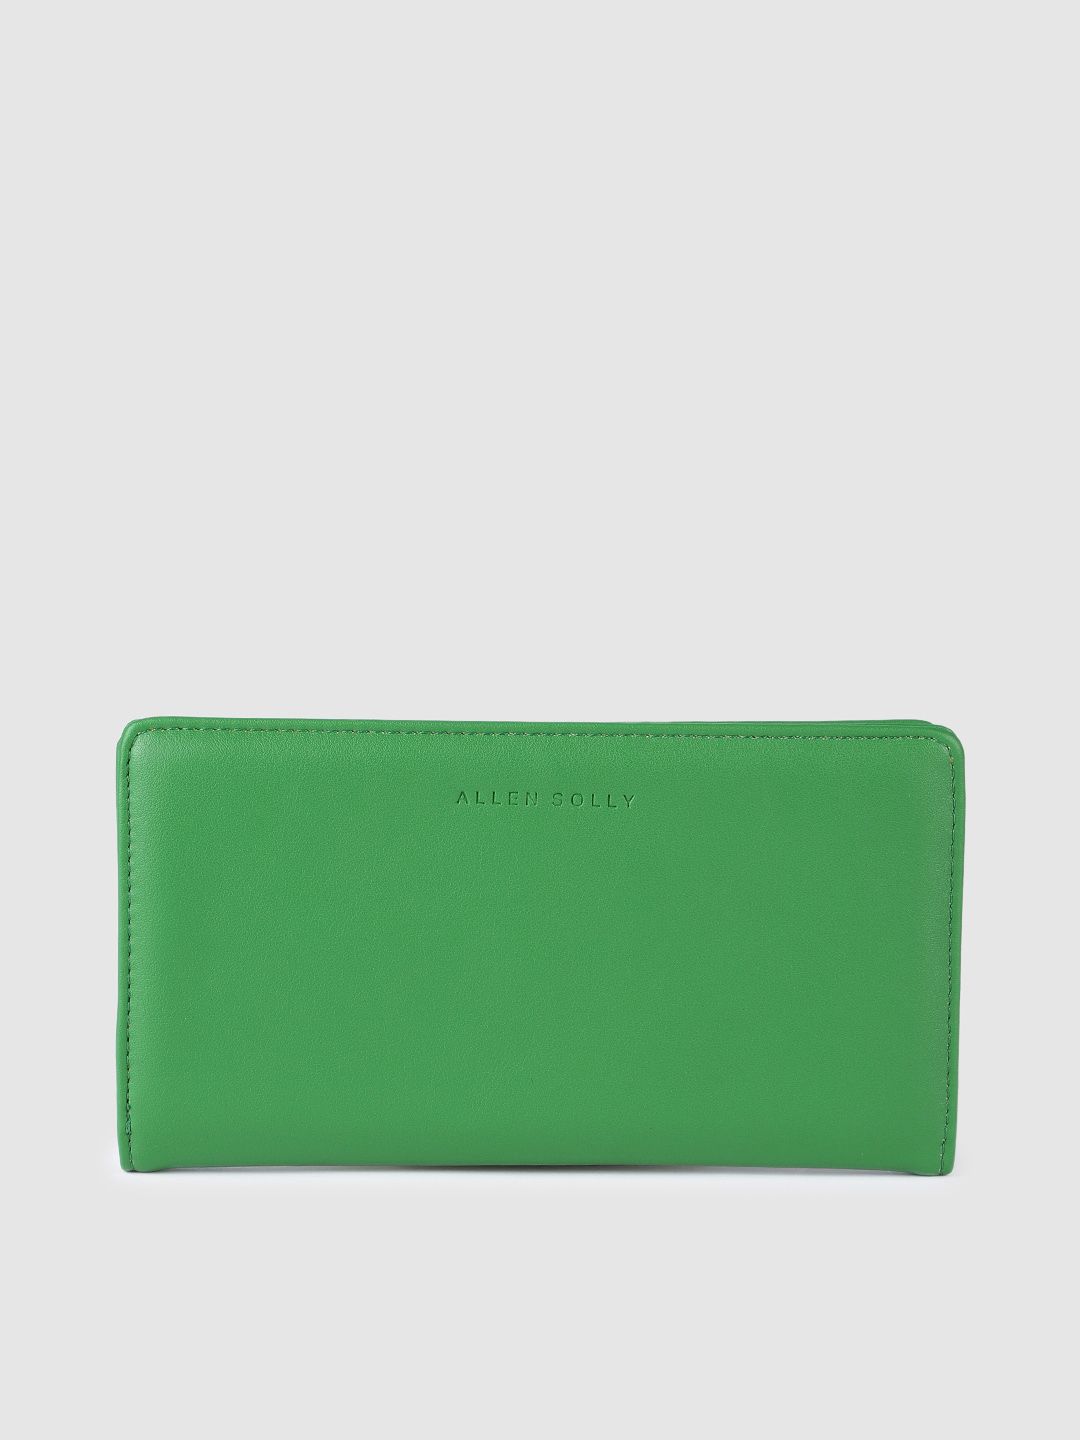 Allen Solly Women Green Solid Two Fold Wallet Price in India